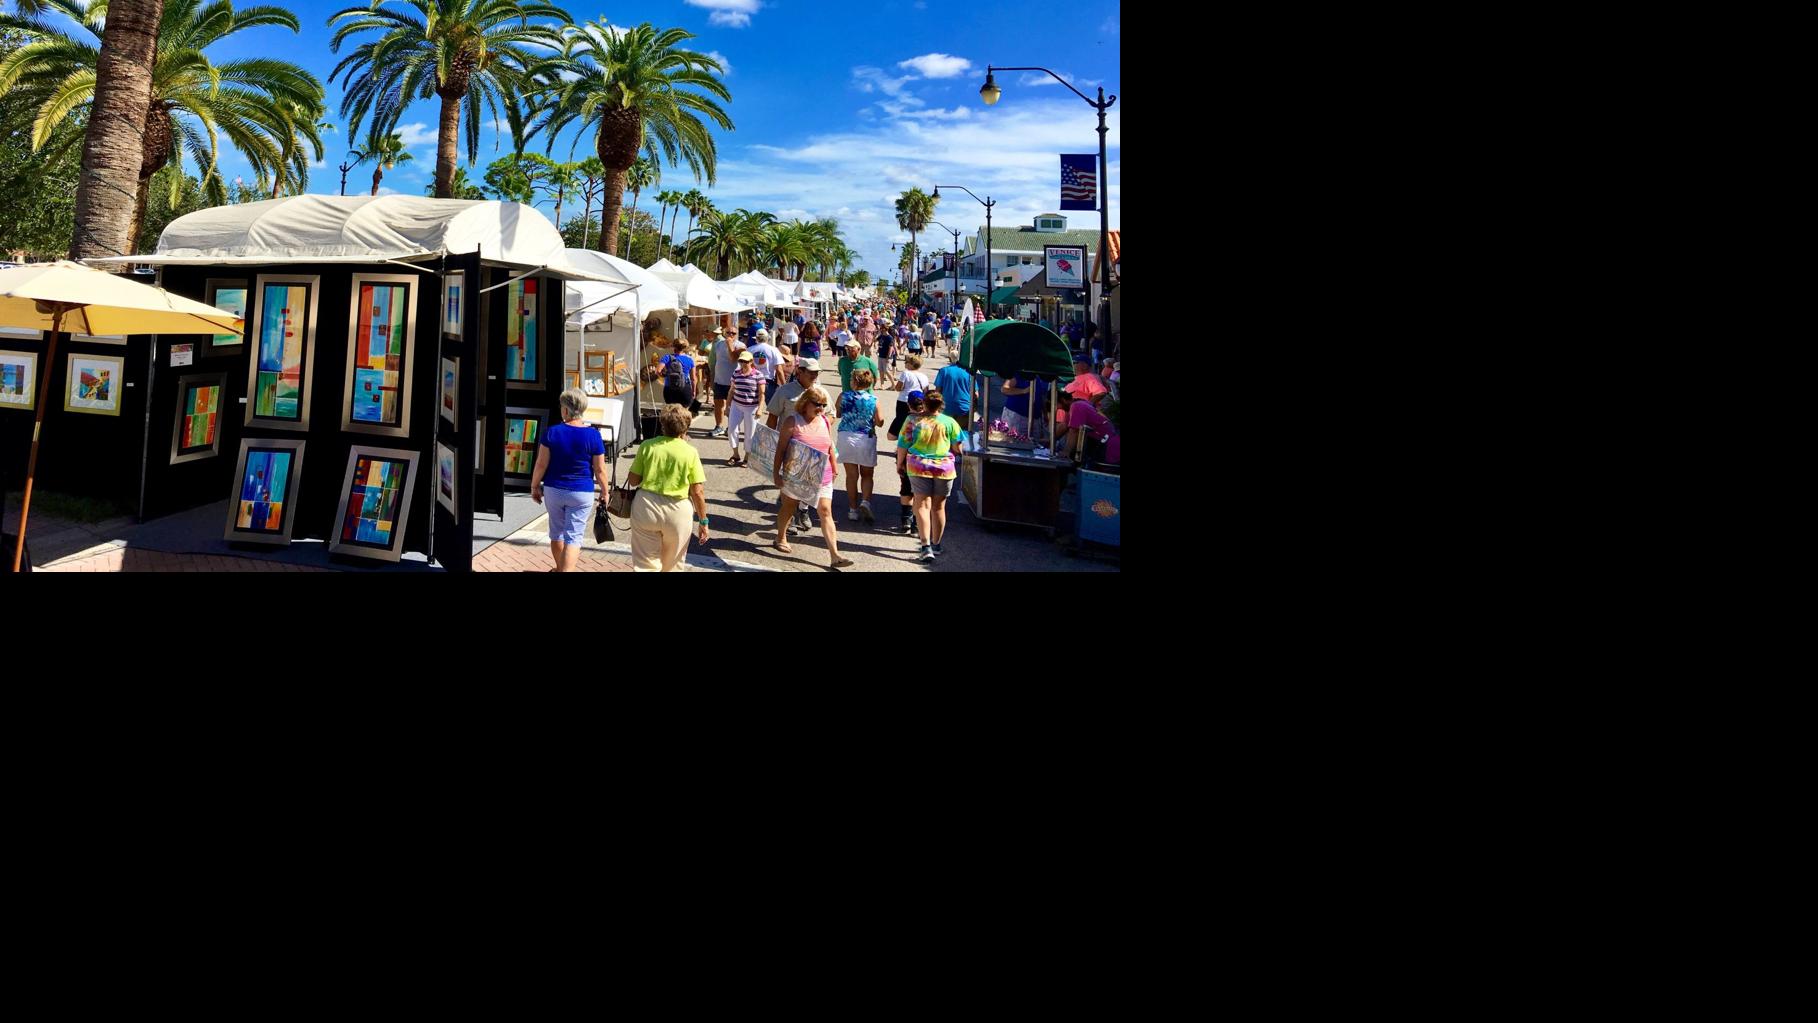 The 32nd annual Downtown Venice Art Festival Let's Go!